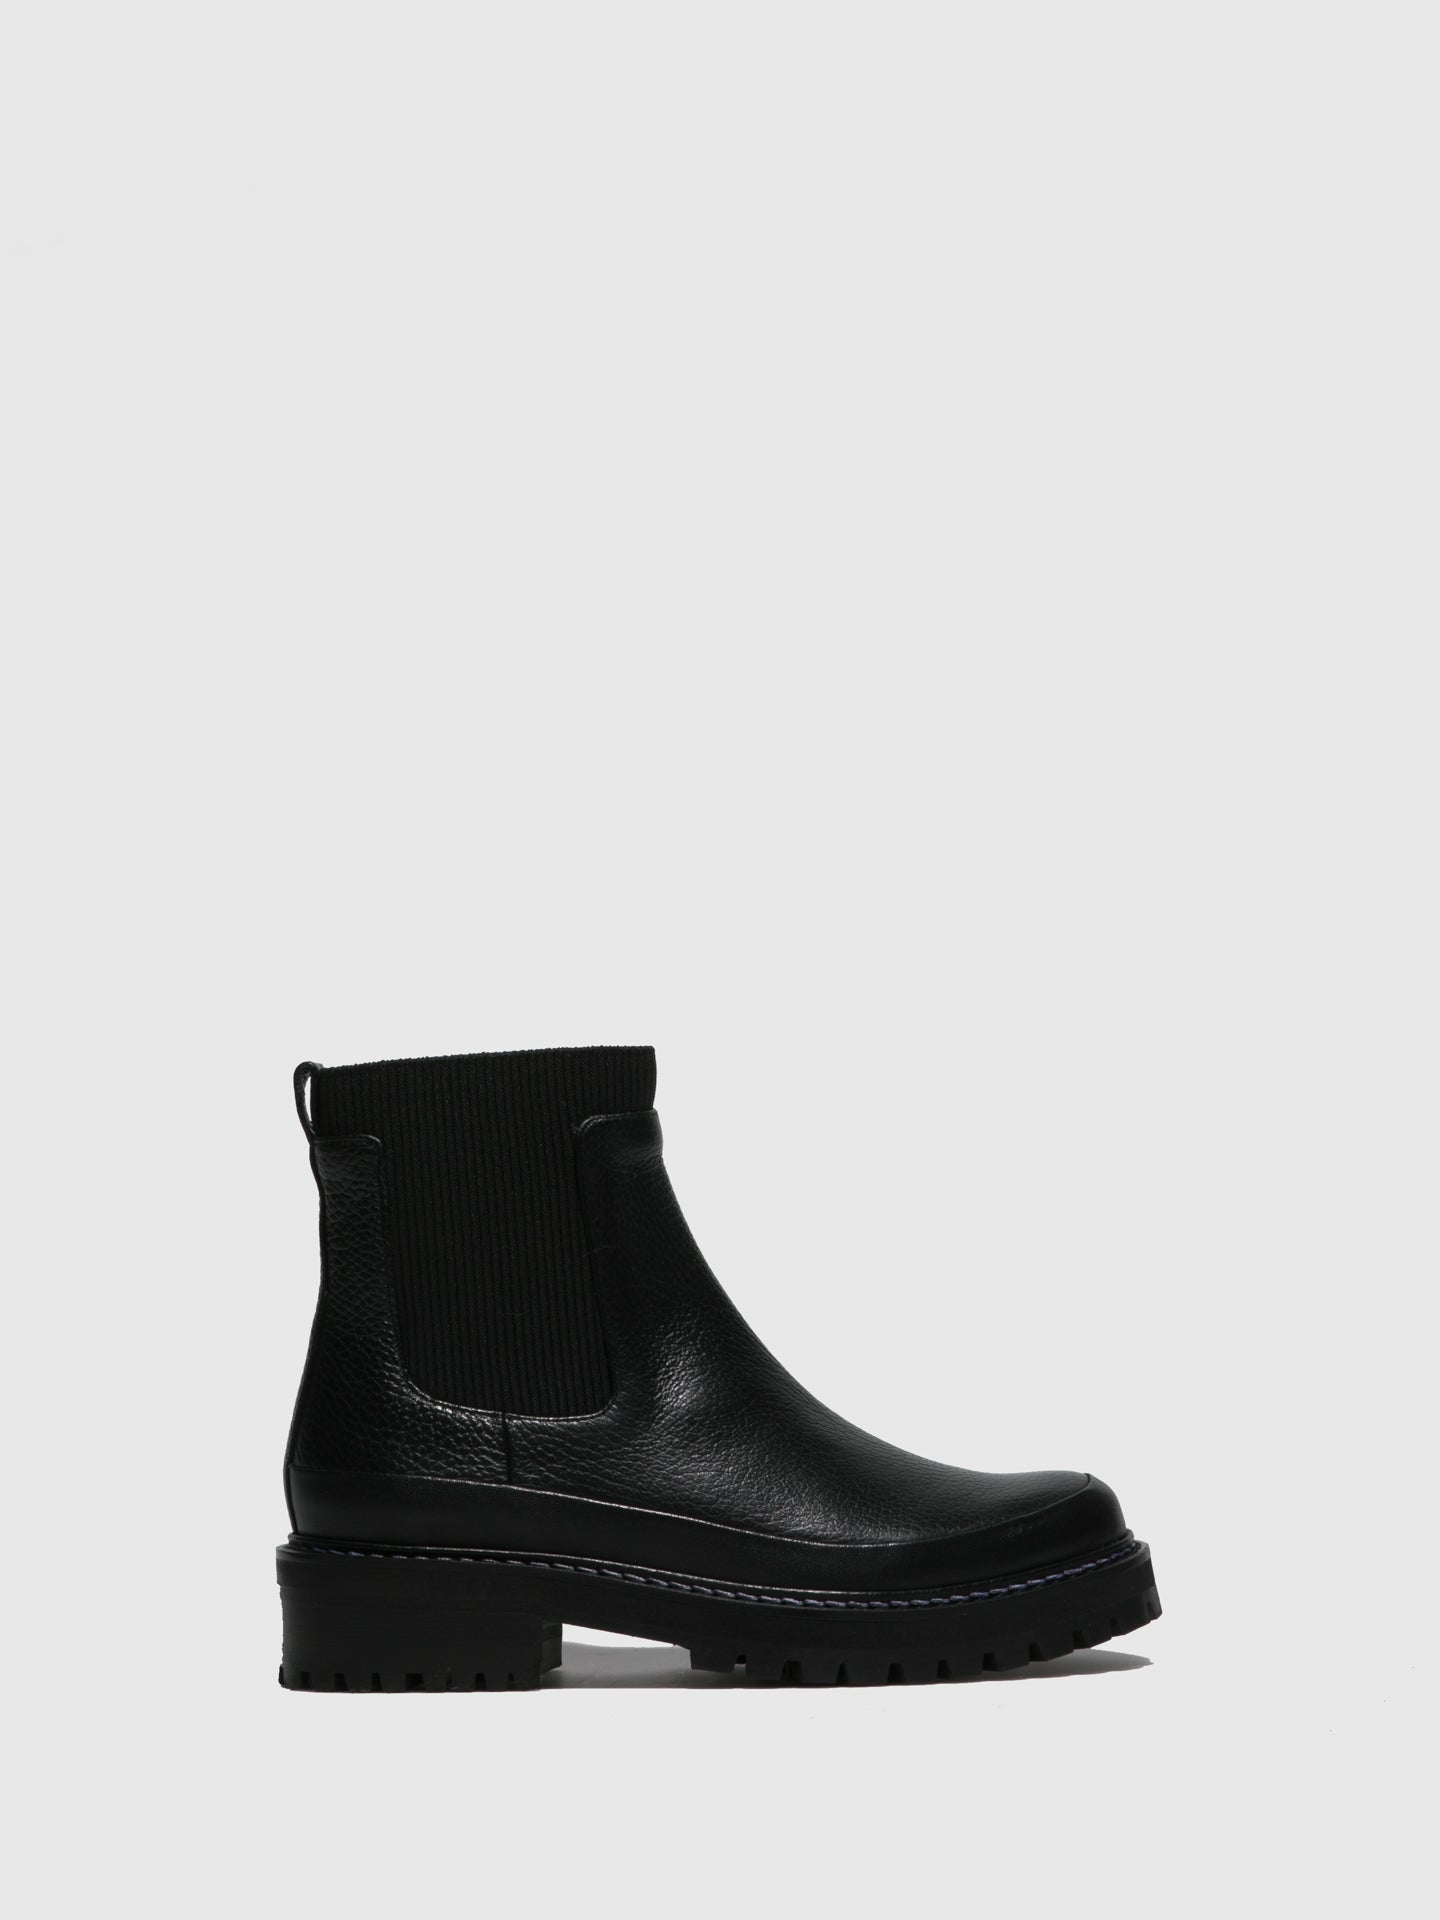 JJ Heitor Black Elasticated Ankle Boots